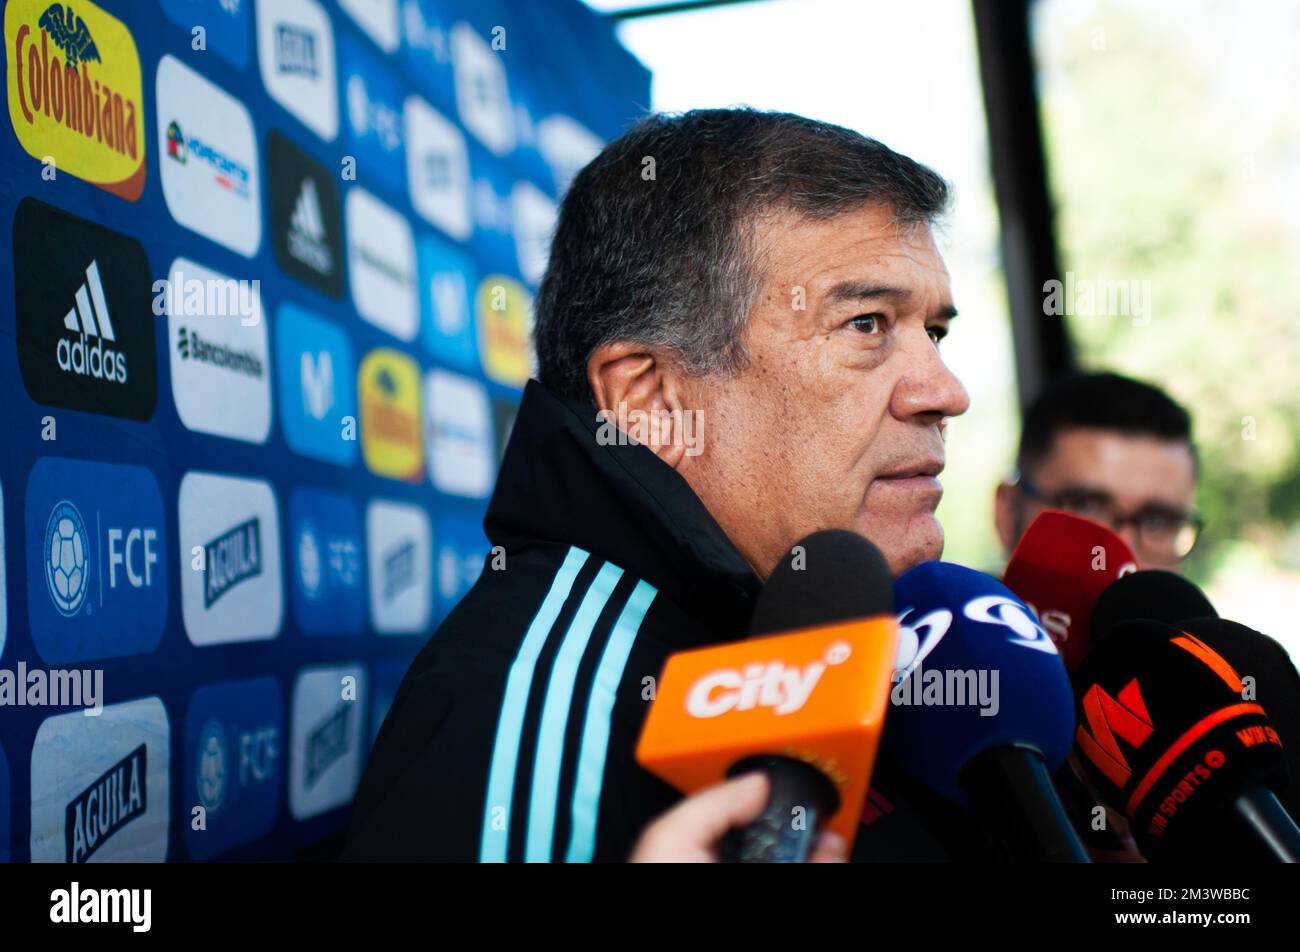 Team manager Nelson Abadia speaks with the media during Colombia's womens team preparations in Bogota, Colombia for the 2023 Australia's Womens World Cup, december 15, 2022. Photo by: S. Barros/Long Visual Press Stock Photo